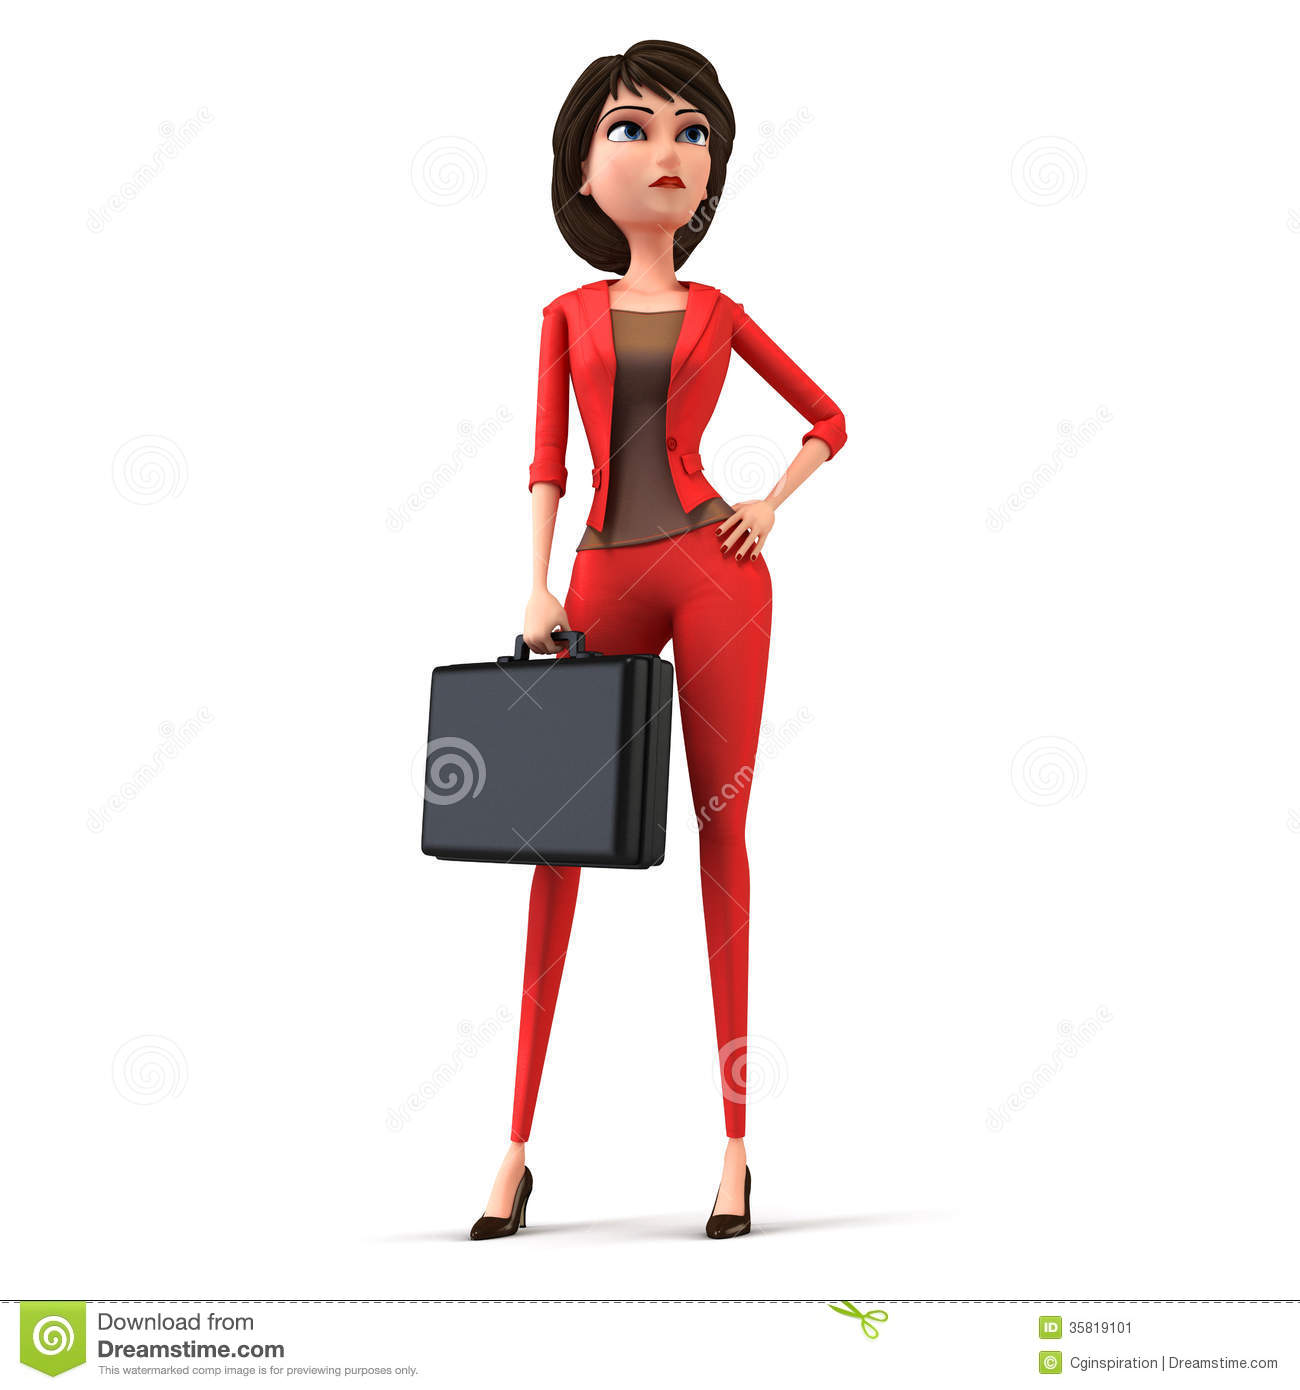 Professional clipart ambition.  collection of business